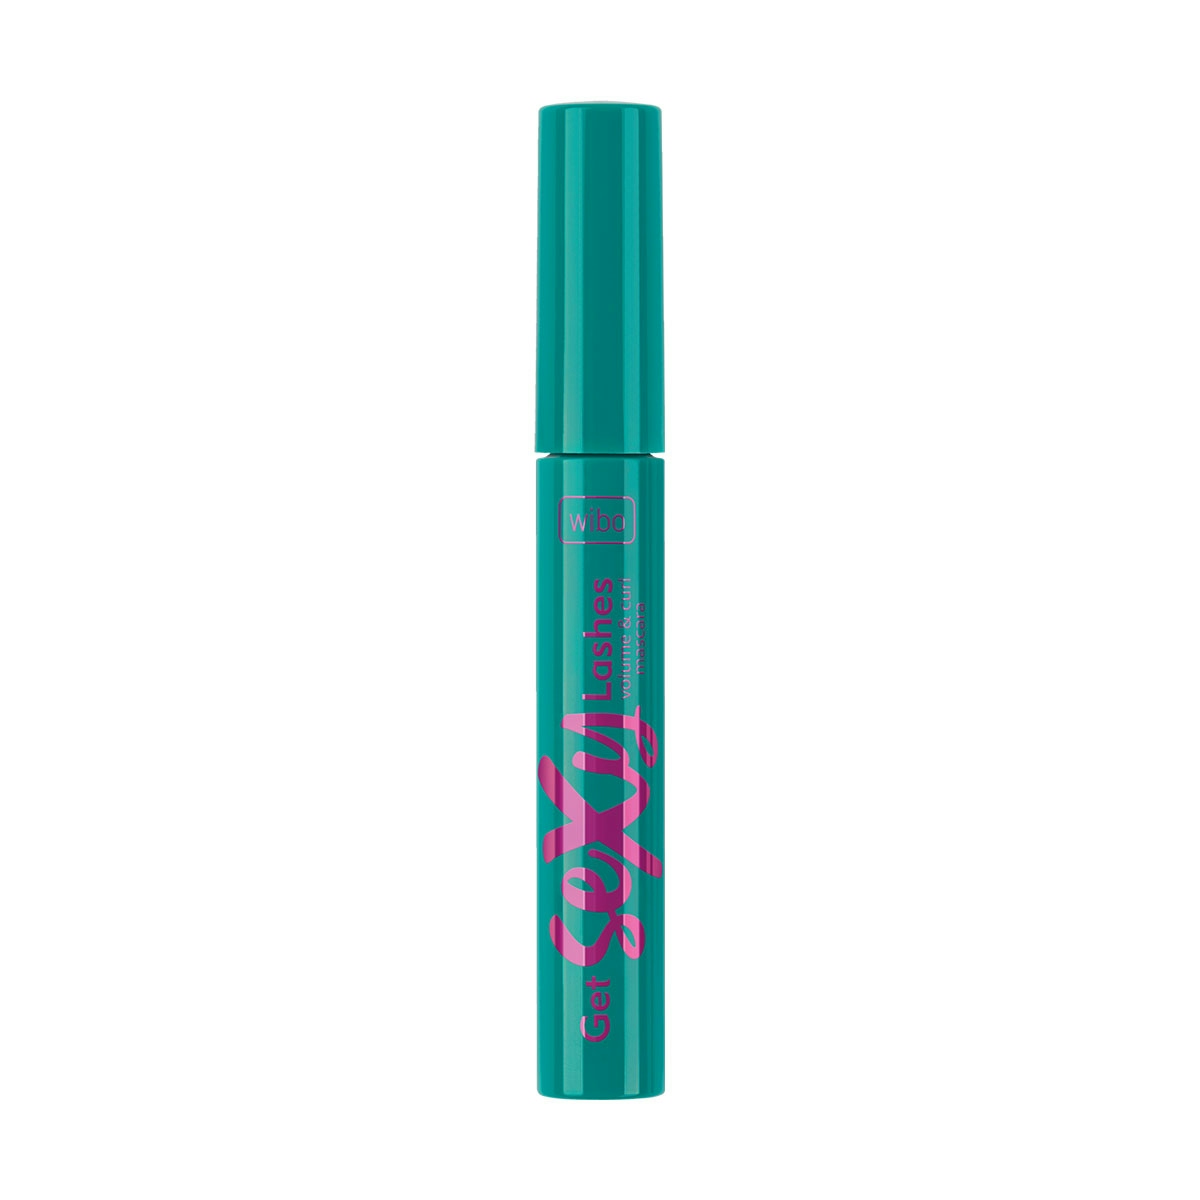 Mascara Get Sexy Lashes Volume & Curling Wibo